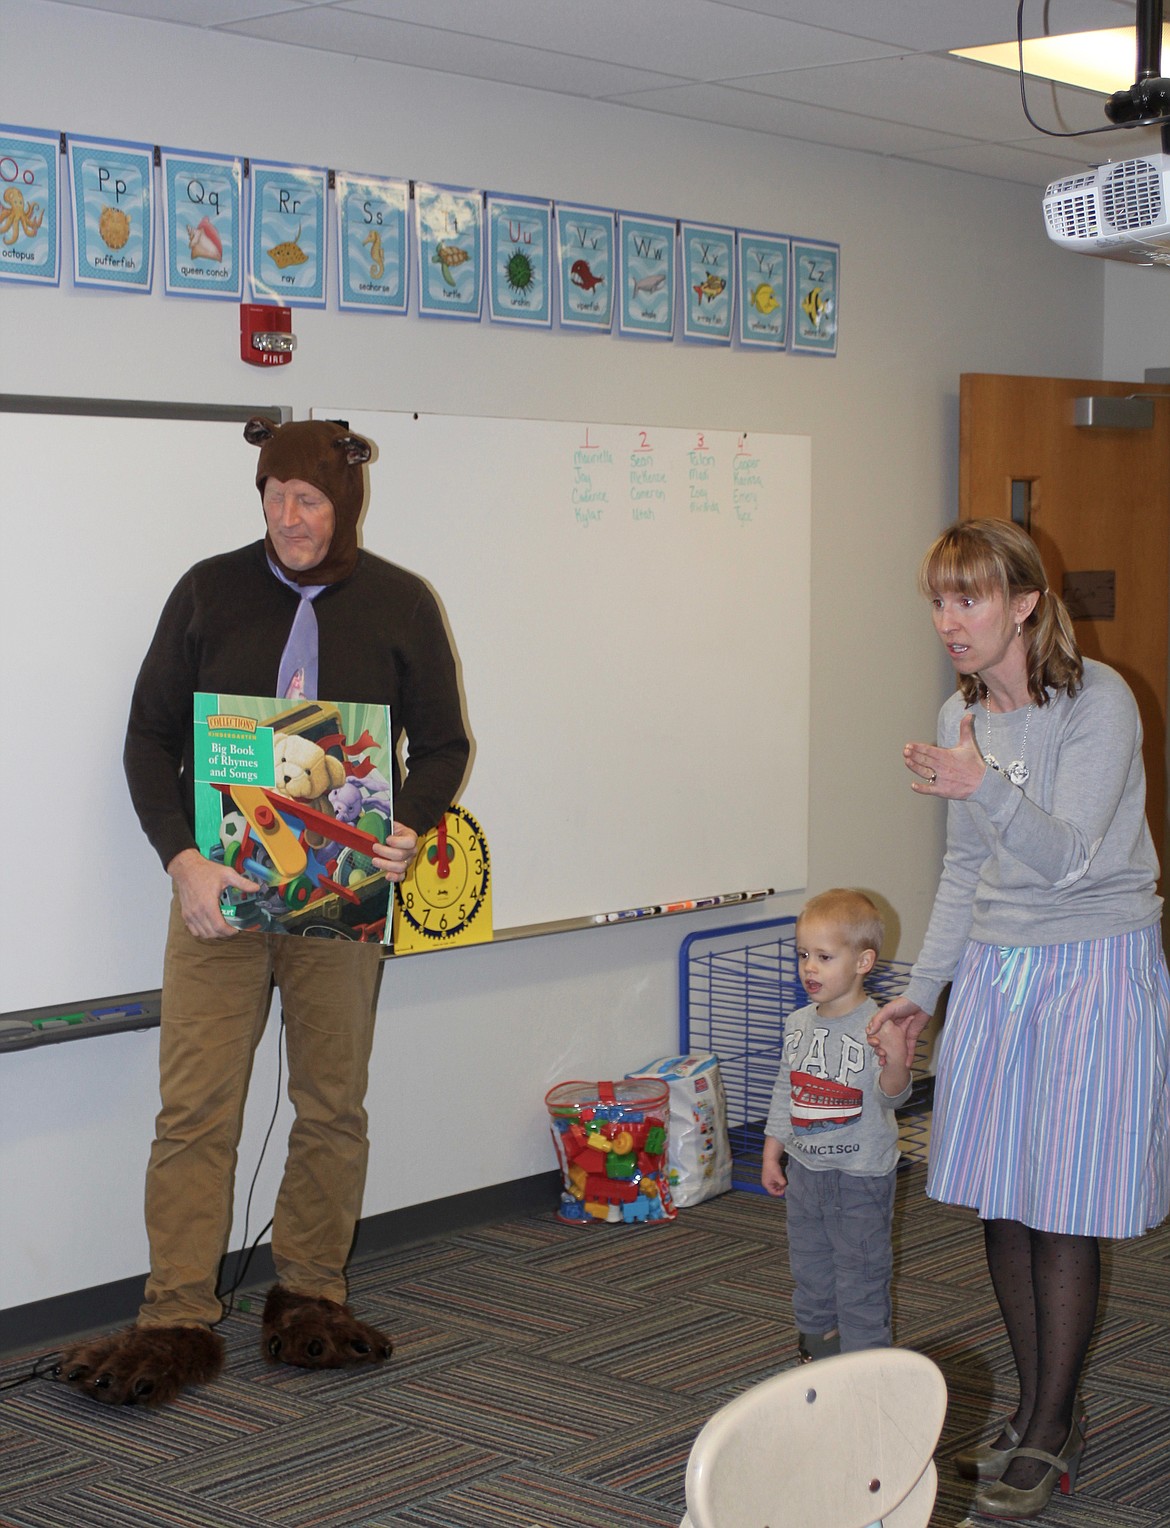 GOLDILOCKS (PLAINS Elementary Counselor Molly Tingley) and Papa Bear (Plains Elementary Principal Jim Holland) stop by the kindergarten class to encourage them to read.